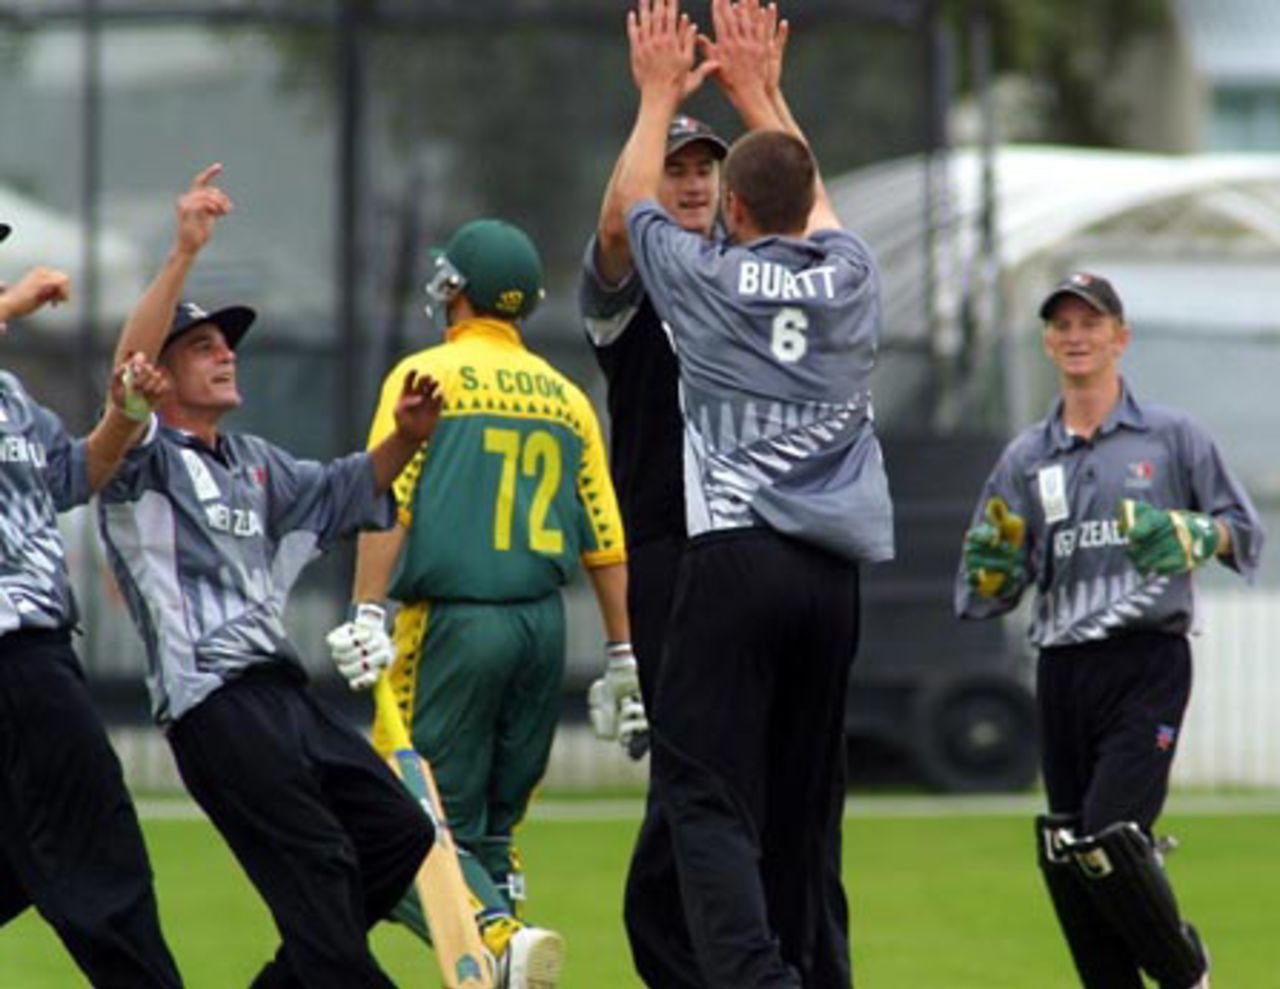 New Zealand Under-19 players celebrate the dismissal of South Africa Under-19 batsman Stephen Cook, caught by Peter Borren from the bowling of Leighton Burtt for 63. From left, Borren, Cook, Neil Broom, Burtt and Ian Sandbrook. ICC Under-19 World Cup Super League Group 2: New Zealand Under-19s v South Africa Under-19s at Lincoln Green, Lincoln, 30 January 2002.